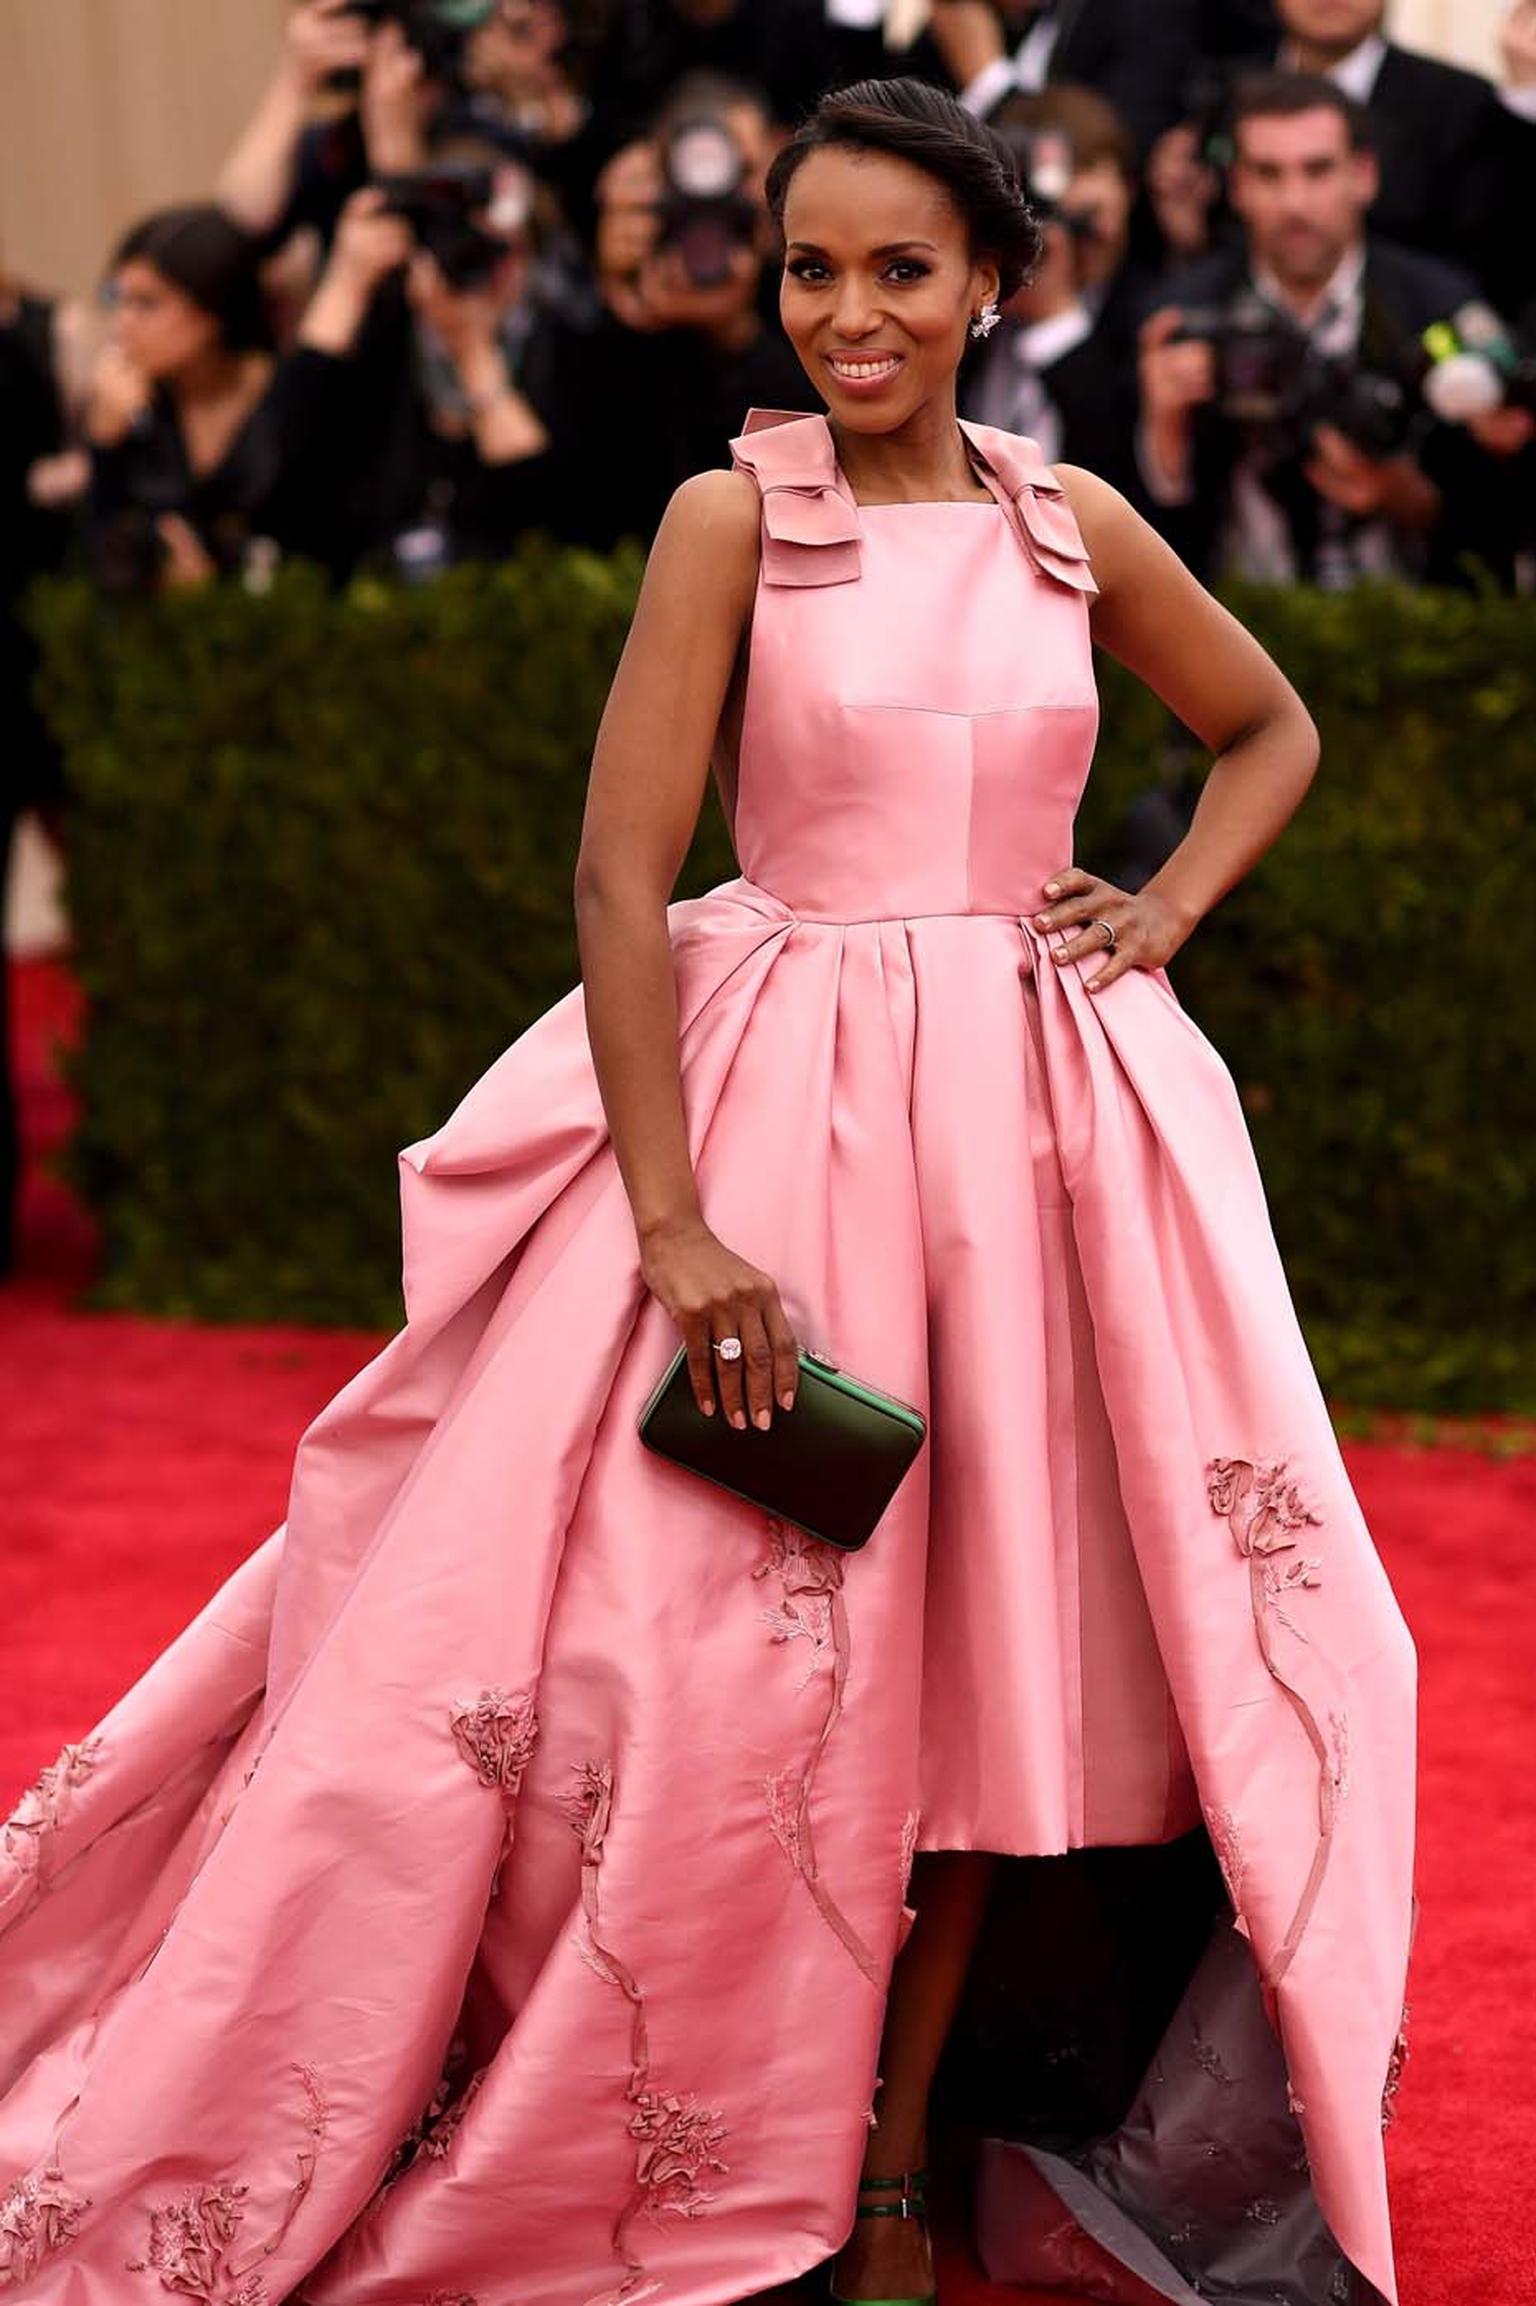 Kerry Washington added some sparkle to her pink Prada ball gown with a pair of 18.82ct Harry Winston Cluster diamond earrings set in platinum, and a cushion-cut Winston diamond platinum ring, at the Met Gala in New York.